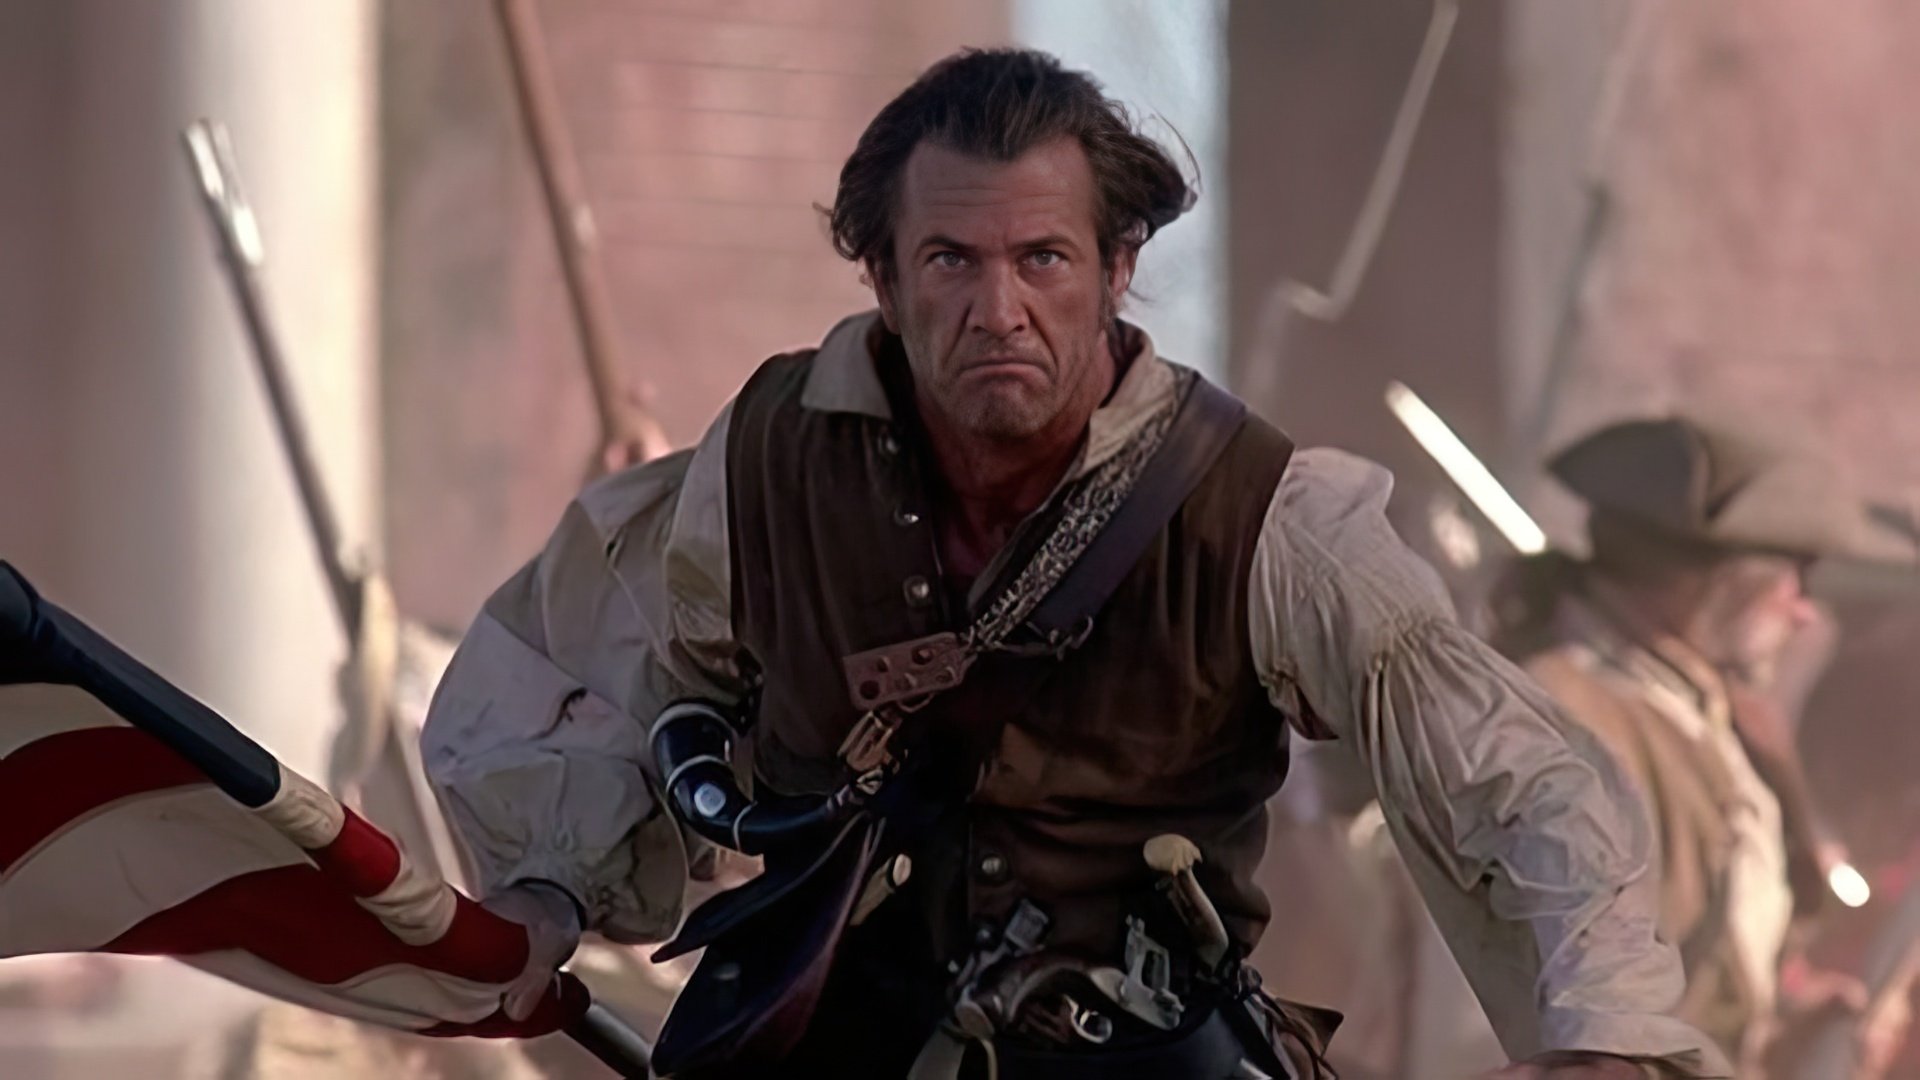  The audience loved Mel Gibson’s character in the historical drama The Patriot